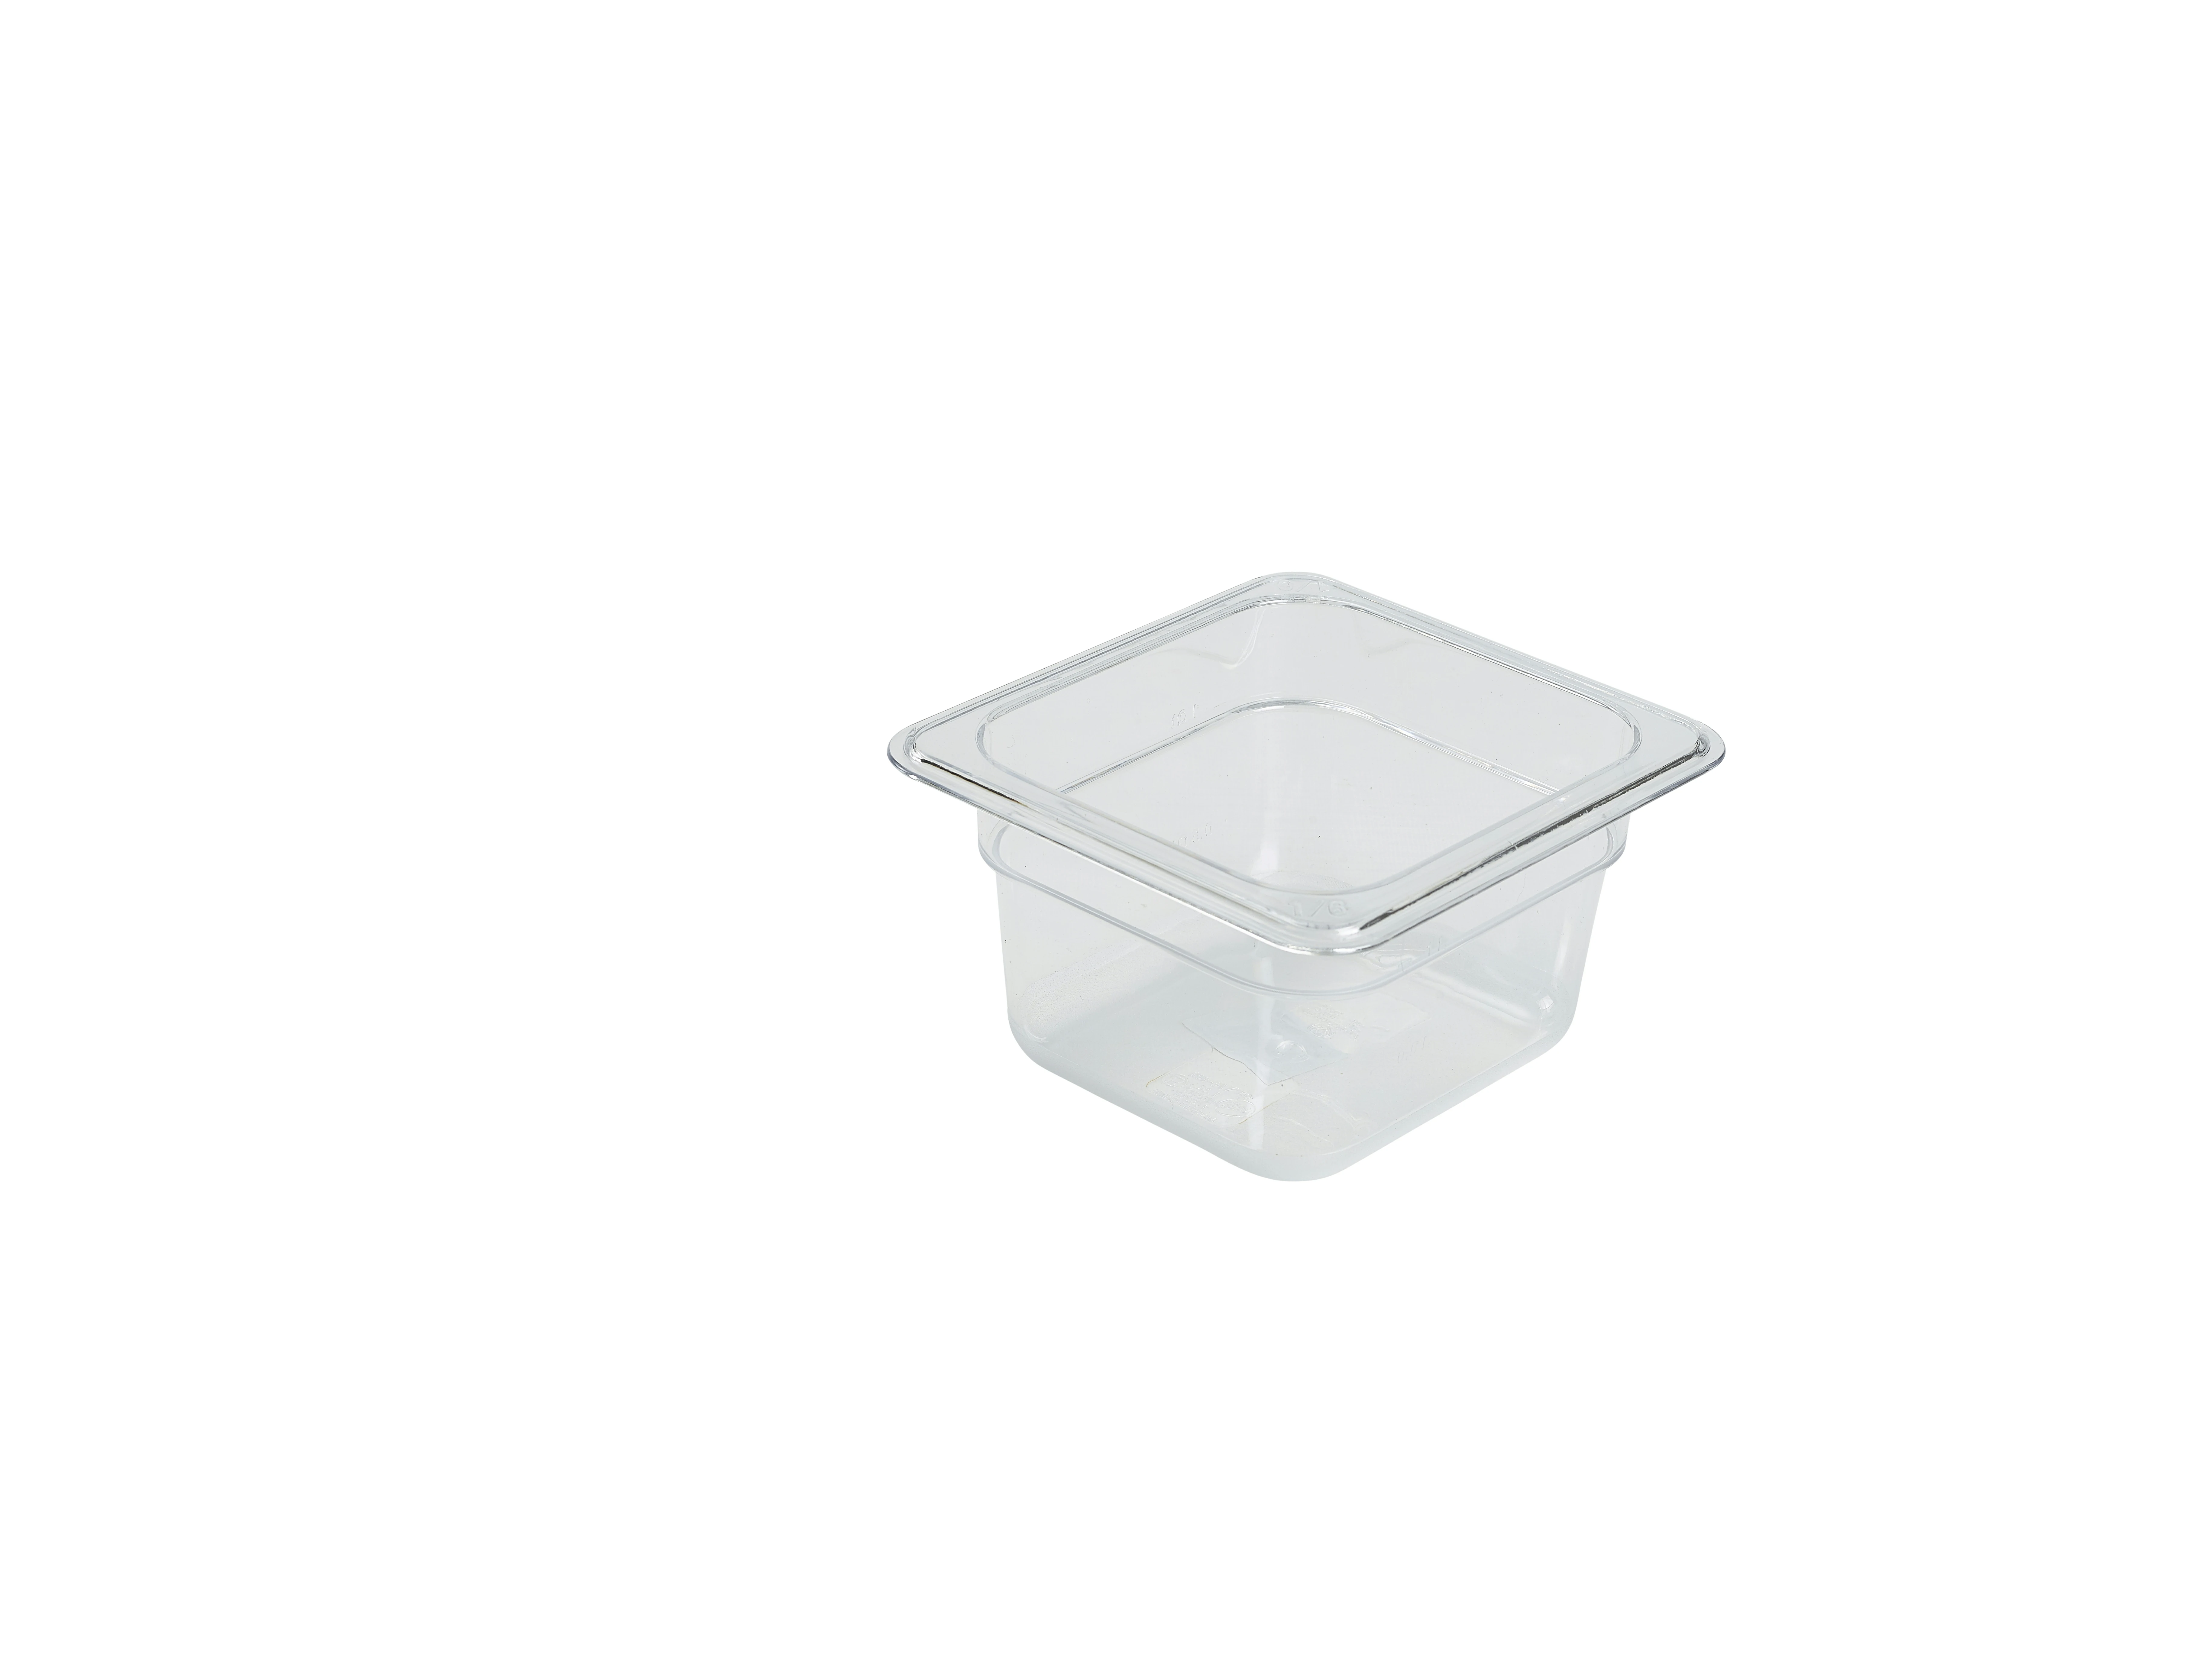 1/6 -Polycarbonate GN Pan 100mm Clear